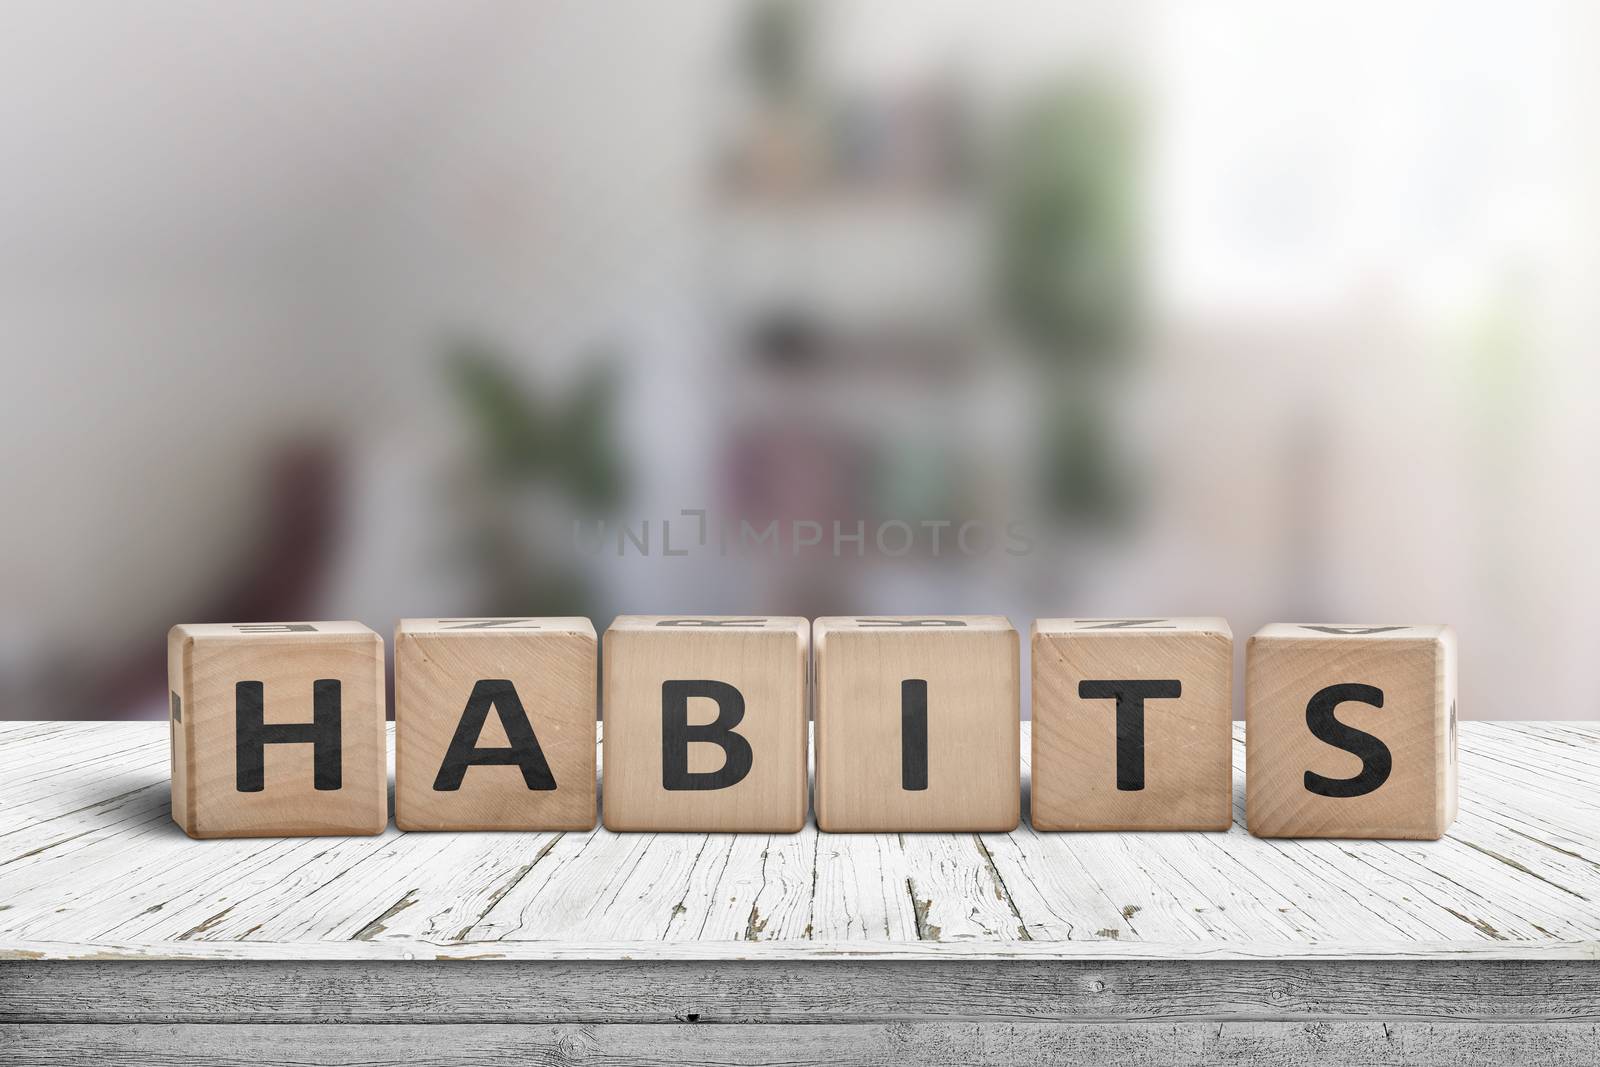 What is your habits? Sign with the word habits on a wooden desk in a bright room